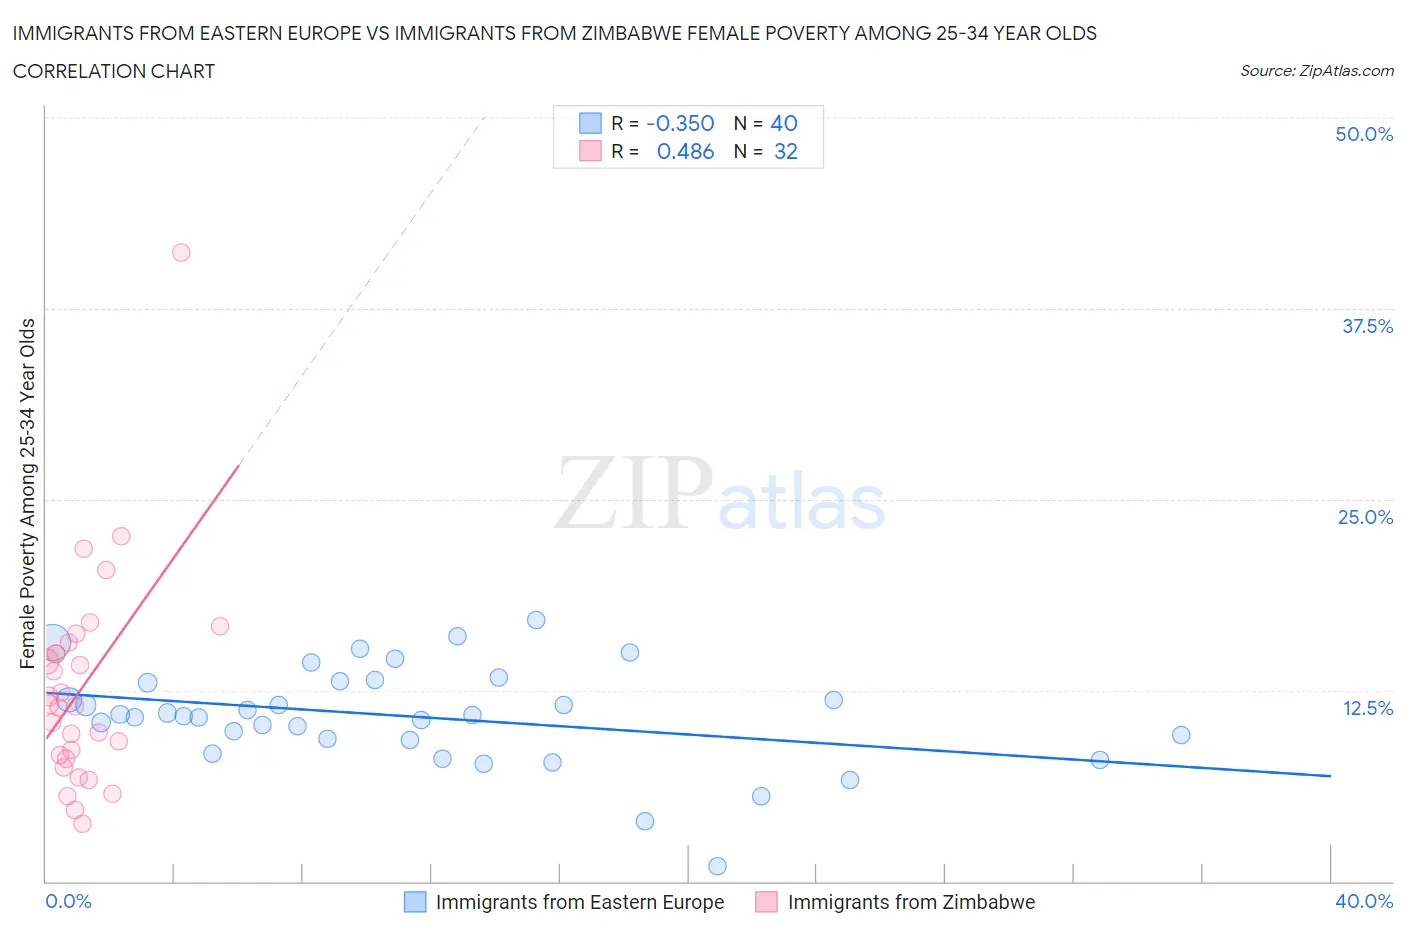 Immigrants from Eastern Europe vs Immigrants from Zimbabwe Female Poverty Among 25-34 Year Olds